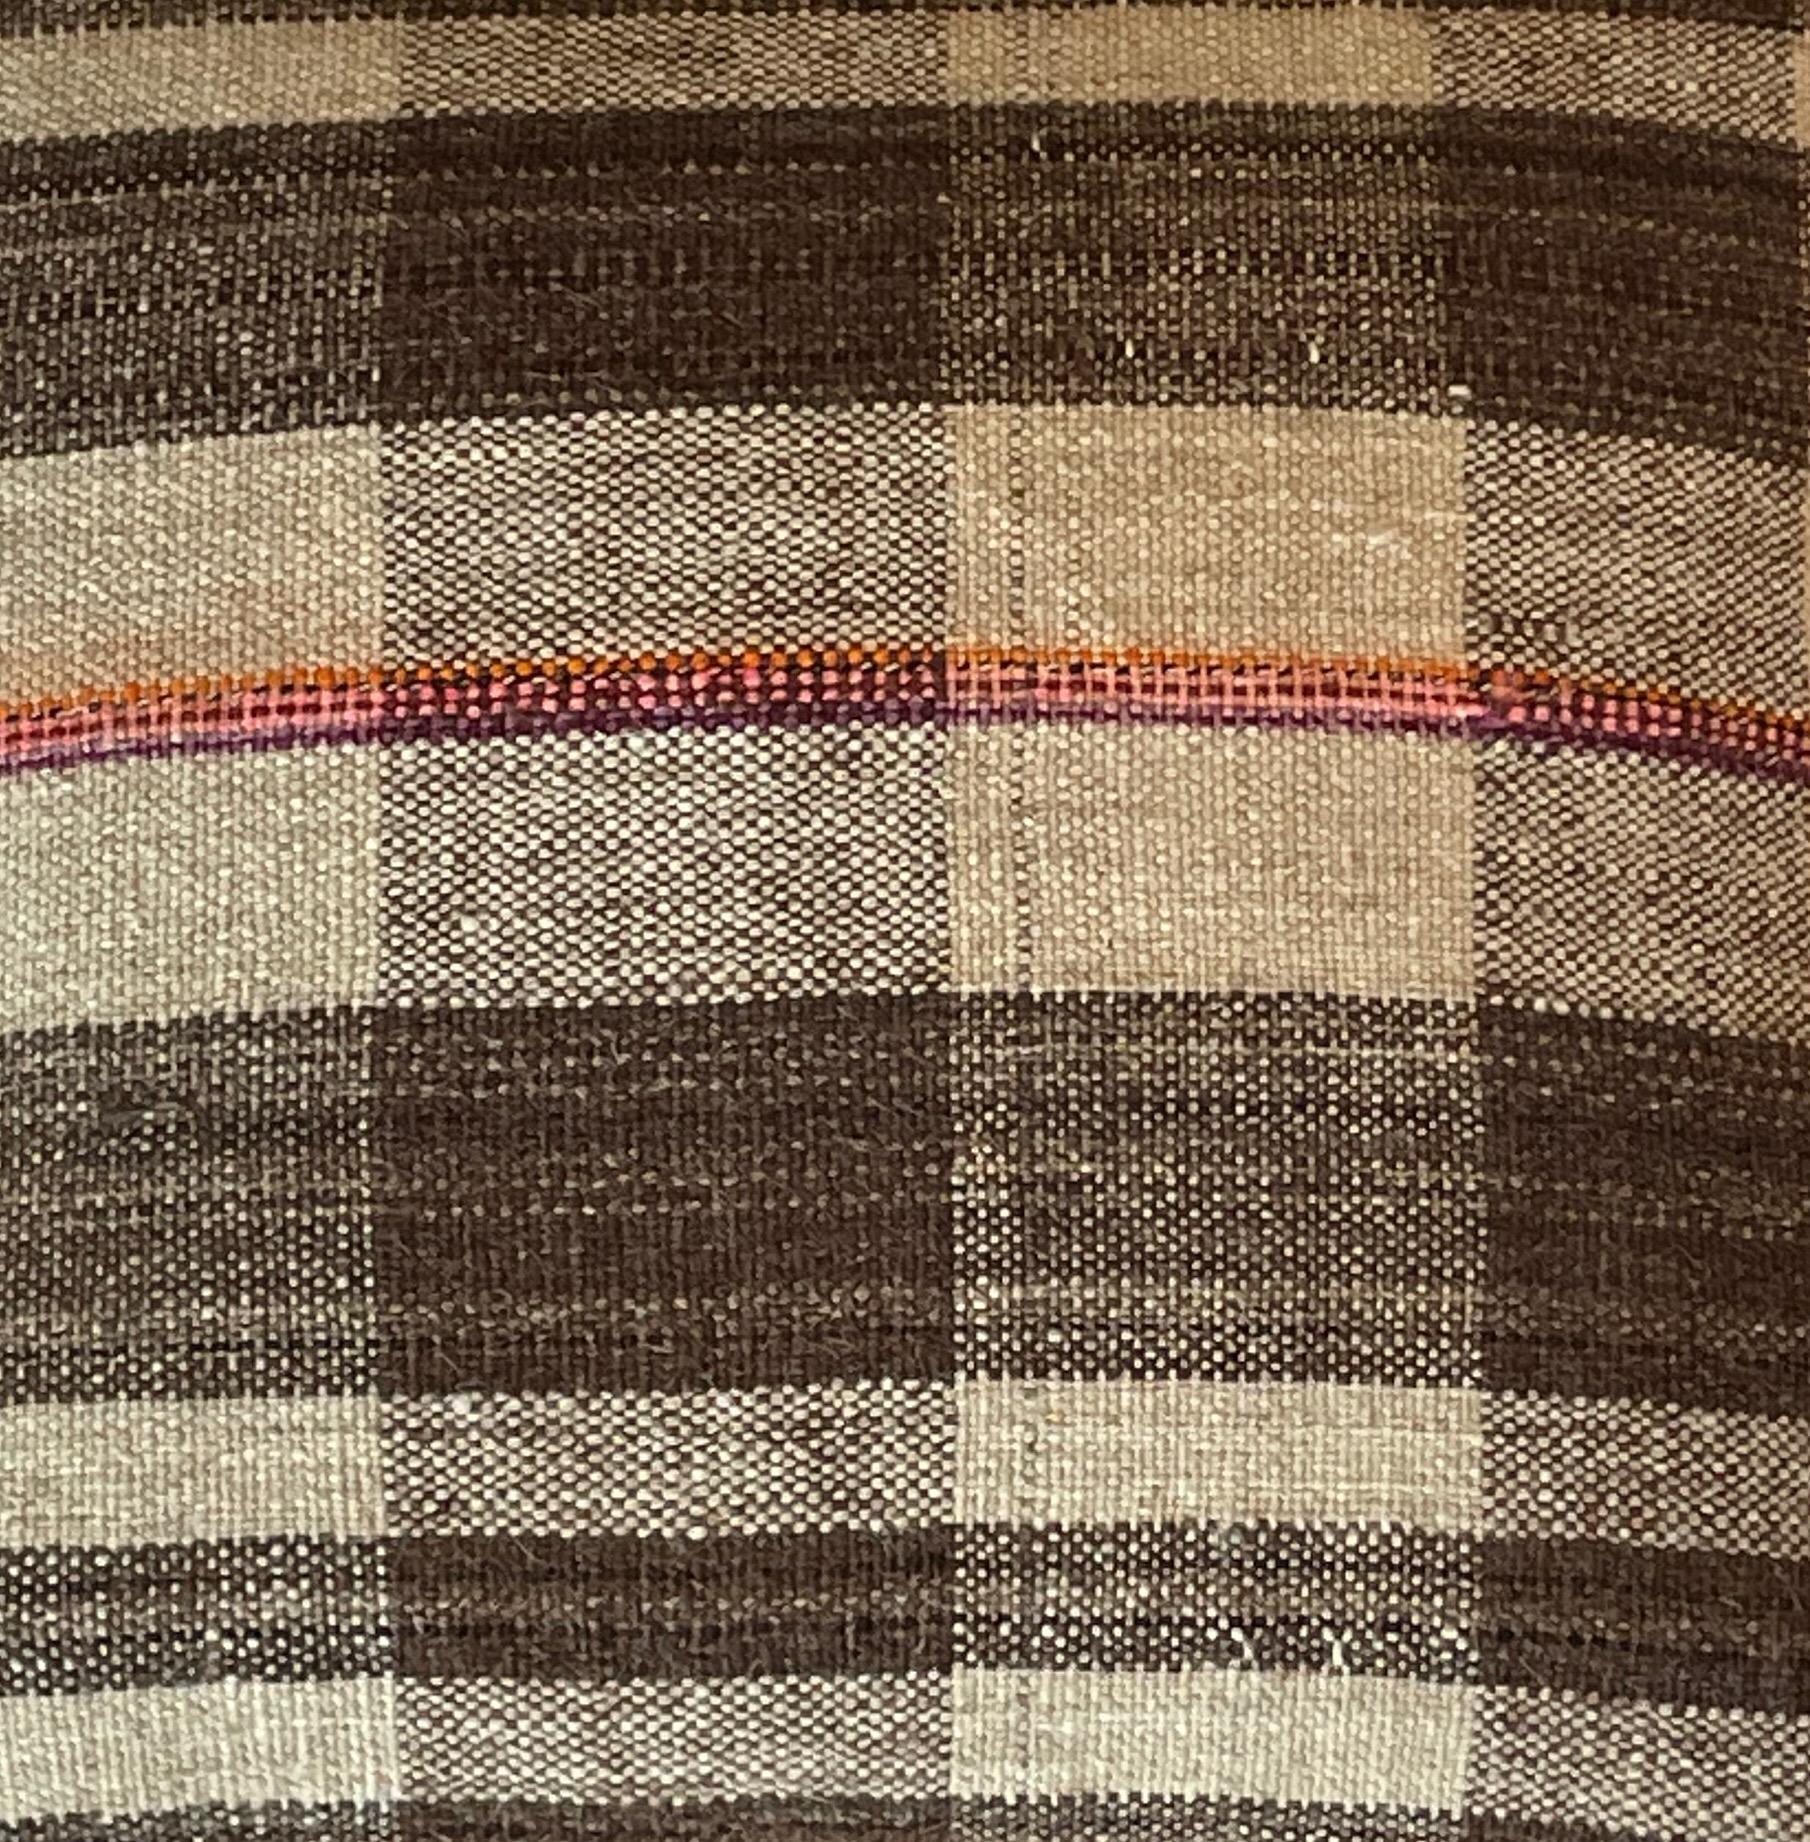 Midcentury Portuguese pillow made from handwoven fabric used originally as flour sacks.
New down and feather insert.
Wide brown and cream stripes with an orange, pink and purple band.